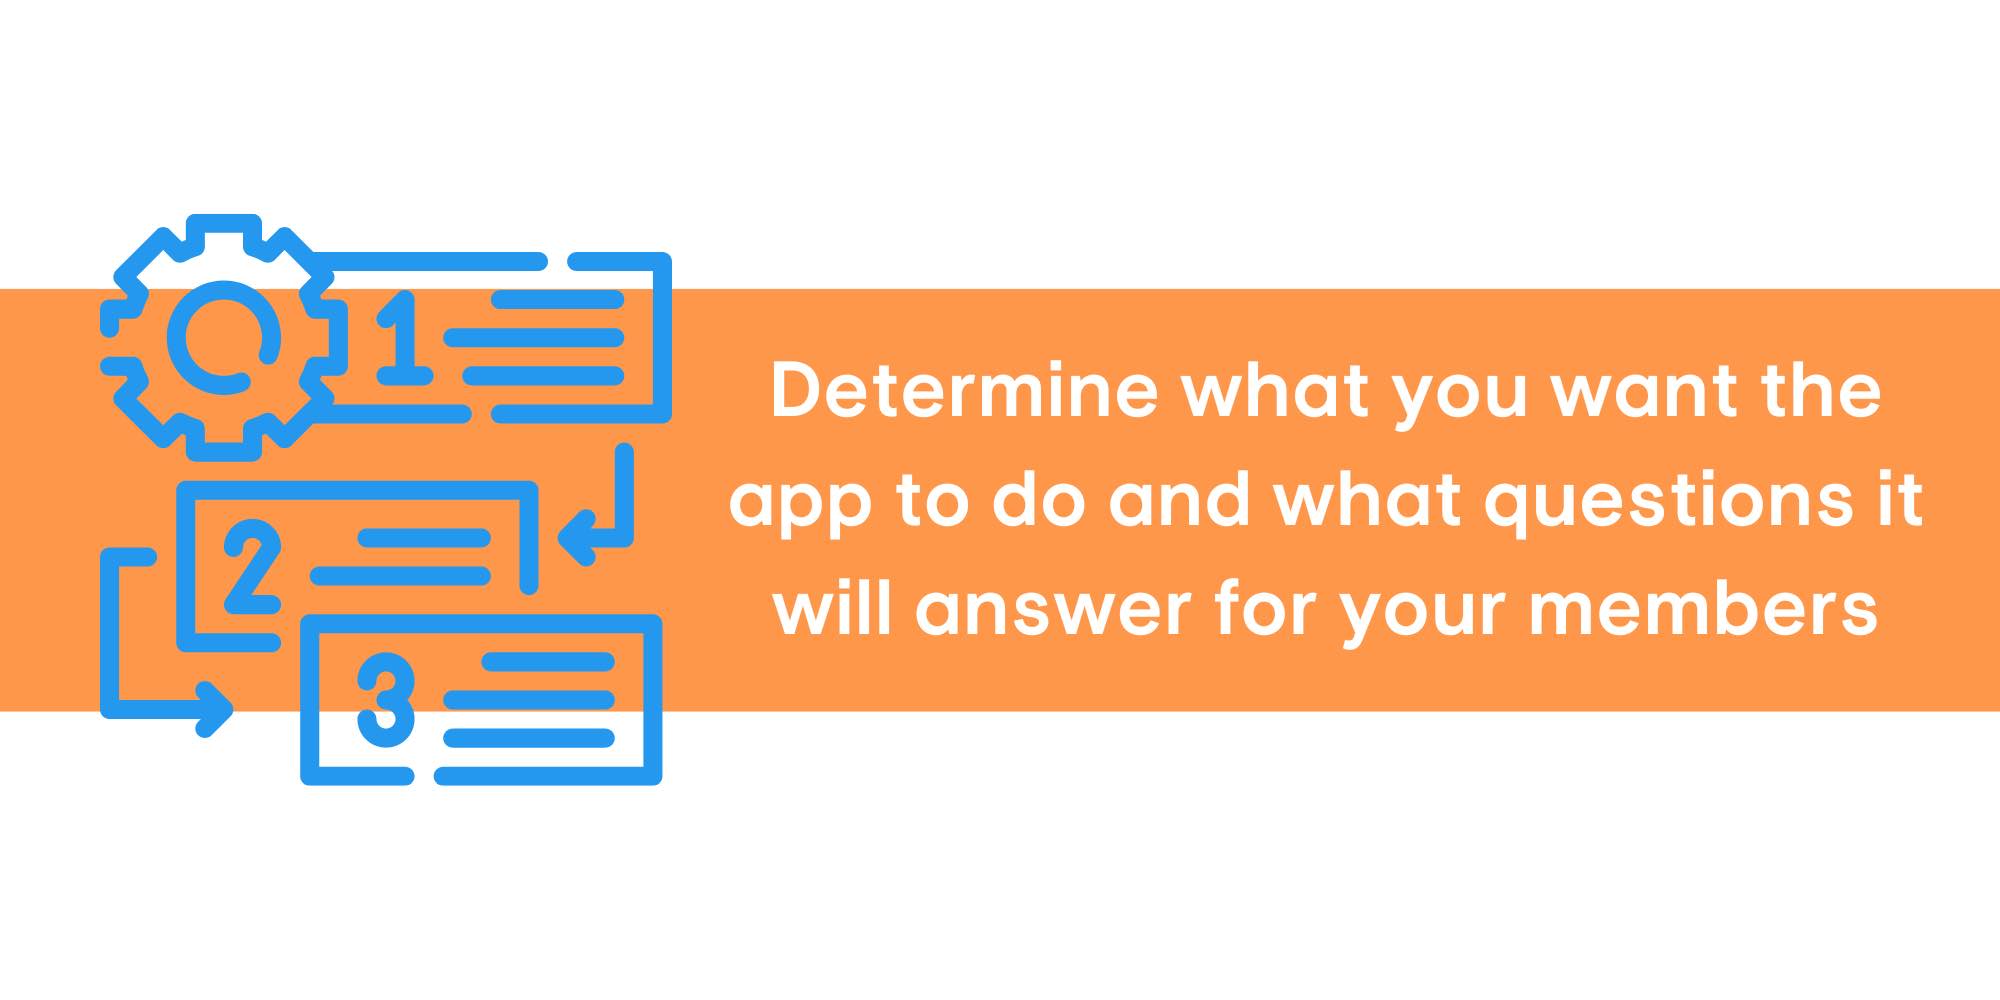 Plan what you want the app to do or accomplish for your ministry